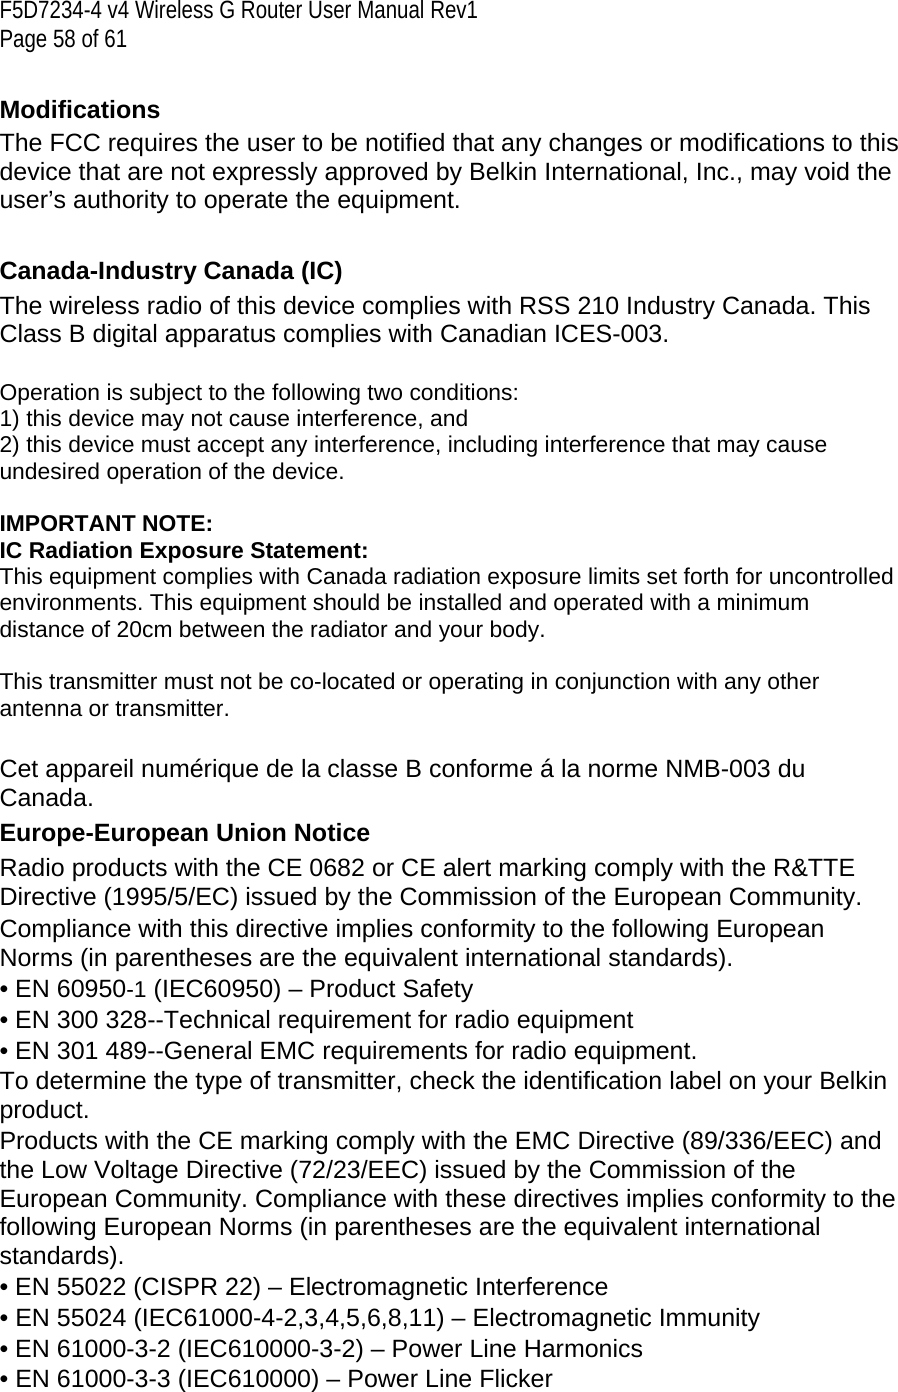 F5D7234-4 v4 Wireless G Router User Manual Rev1  Page 58 of 61   Modifications  The FCC requires the user to be notified that any changes or modifications to this device that are not expressly approved by Belkin International, Inc., may void the user’s authority to operate the equipment.  Canada-Industry Canada (IC) The wireless radio of this device complies with RSS 210 Industry Canada. This Class B digital apparatus complies with Canadian ICES-003.  Operation is subject to the following two conditions: 1) this device may not cause interference, and 2) this device must accept any interference, including interference that may cause undesired operation of the device.  IMPORTANT NOTE: IC Radiation Exposure Statement: This equipment complies with Canada radiation exposure limits set forth for uncontrolled environments. This equipment should be installed and operated with a minimum distance of 20cm between the radiator and your body.  This transmitter must not be co-located or operating in conjunction with any other antenna or transmitter.  Cet appareil numérique de la classe B conforme á la norme NMB-003 du Canada. Europe-European Union Notice  Radio products with the CE 0682 or CE alert marking comply with the R&amp;TTE Directive (1995/5/EC) issued by the Commission of the European Community.  Compliance with this directive implies conformity to the following European Norms (in parentheses are the equivalent international standards).  • EN 60950-1 (IEC60950) – Product Safety  • EN 300 328--Technical requirement for radio equipment  • EN 301 489--General EMC requirements for radio equipment. To determine the type of transmitter, check the identification label on your Belkin product. Products with the CE marking comply with the EMC Directive (89/336/EEC) and the Low Voltage Directive (72/23/EEC) issued by the Commission of the European Community. Compliance with these directives implies conformity to the following European Norms (in parentheses are the equivalent international standards).  • EN 55022 (CISPR 22) – Electromagnetic Interference  • EN 55024 (IEC61000-4-2,3,4,5,6,8,11) – Electromagnetic Immunity  • EN 61000-3-2 (IEC610000-3-2) – Power Line Harmonics  • EN 61000-3-3 (IEC610000) – Power Line Flicker  